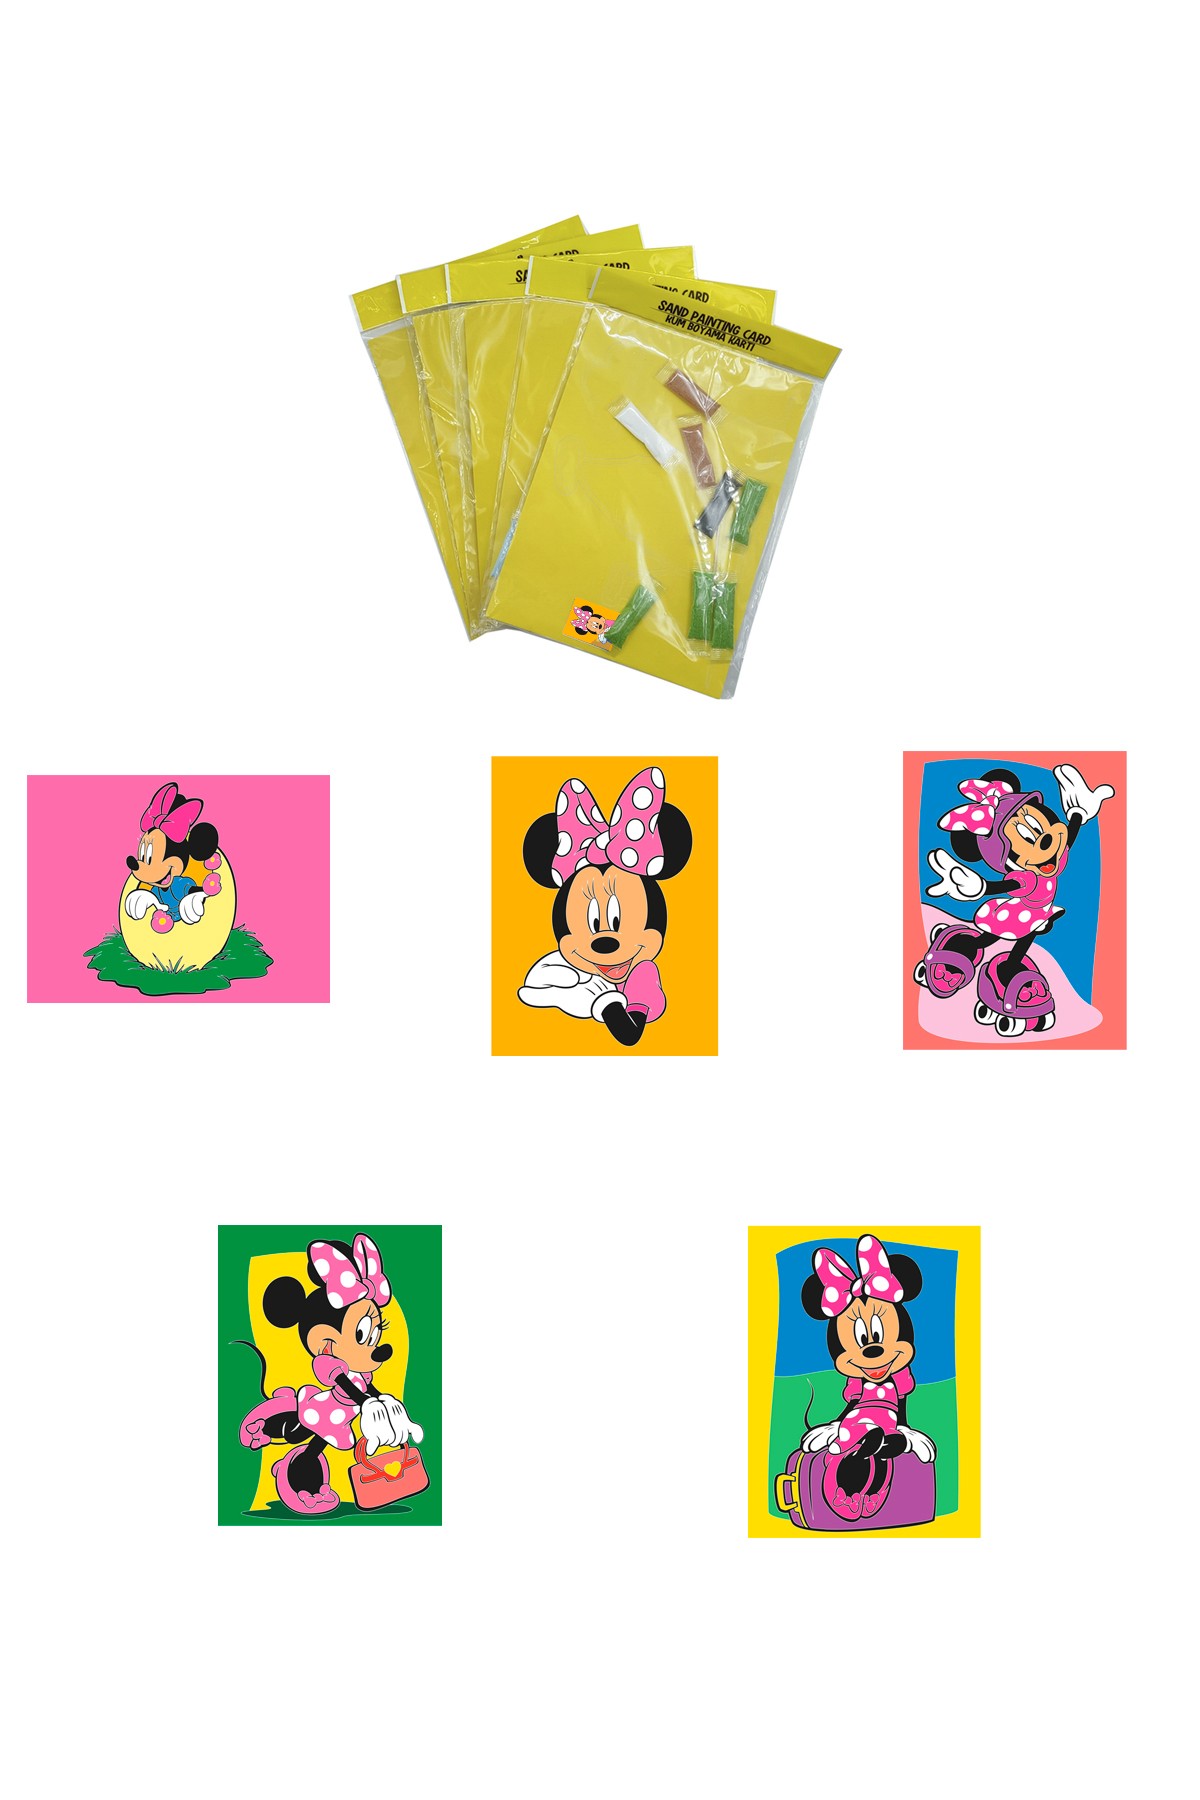 Disney Minnie&Mickey, 10 Pieces Large Size A4, Girls-Boys Sand Painting Card Set - Red Castle KB-D-104